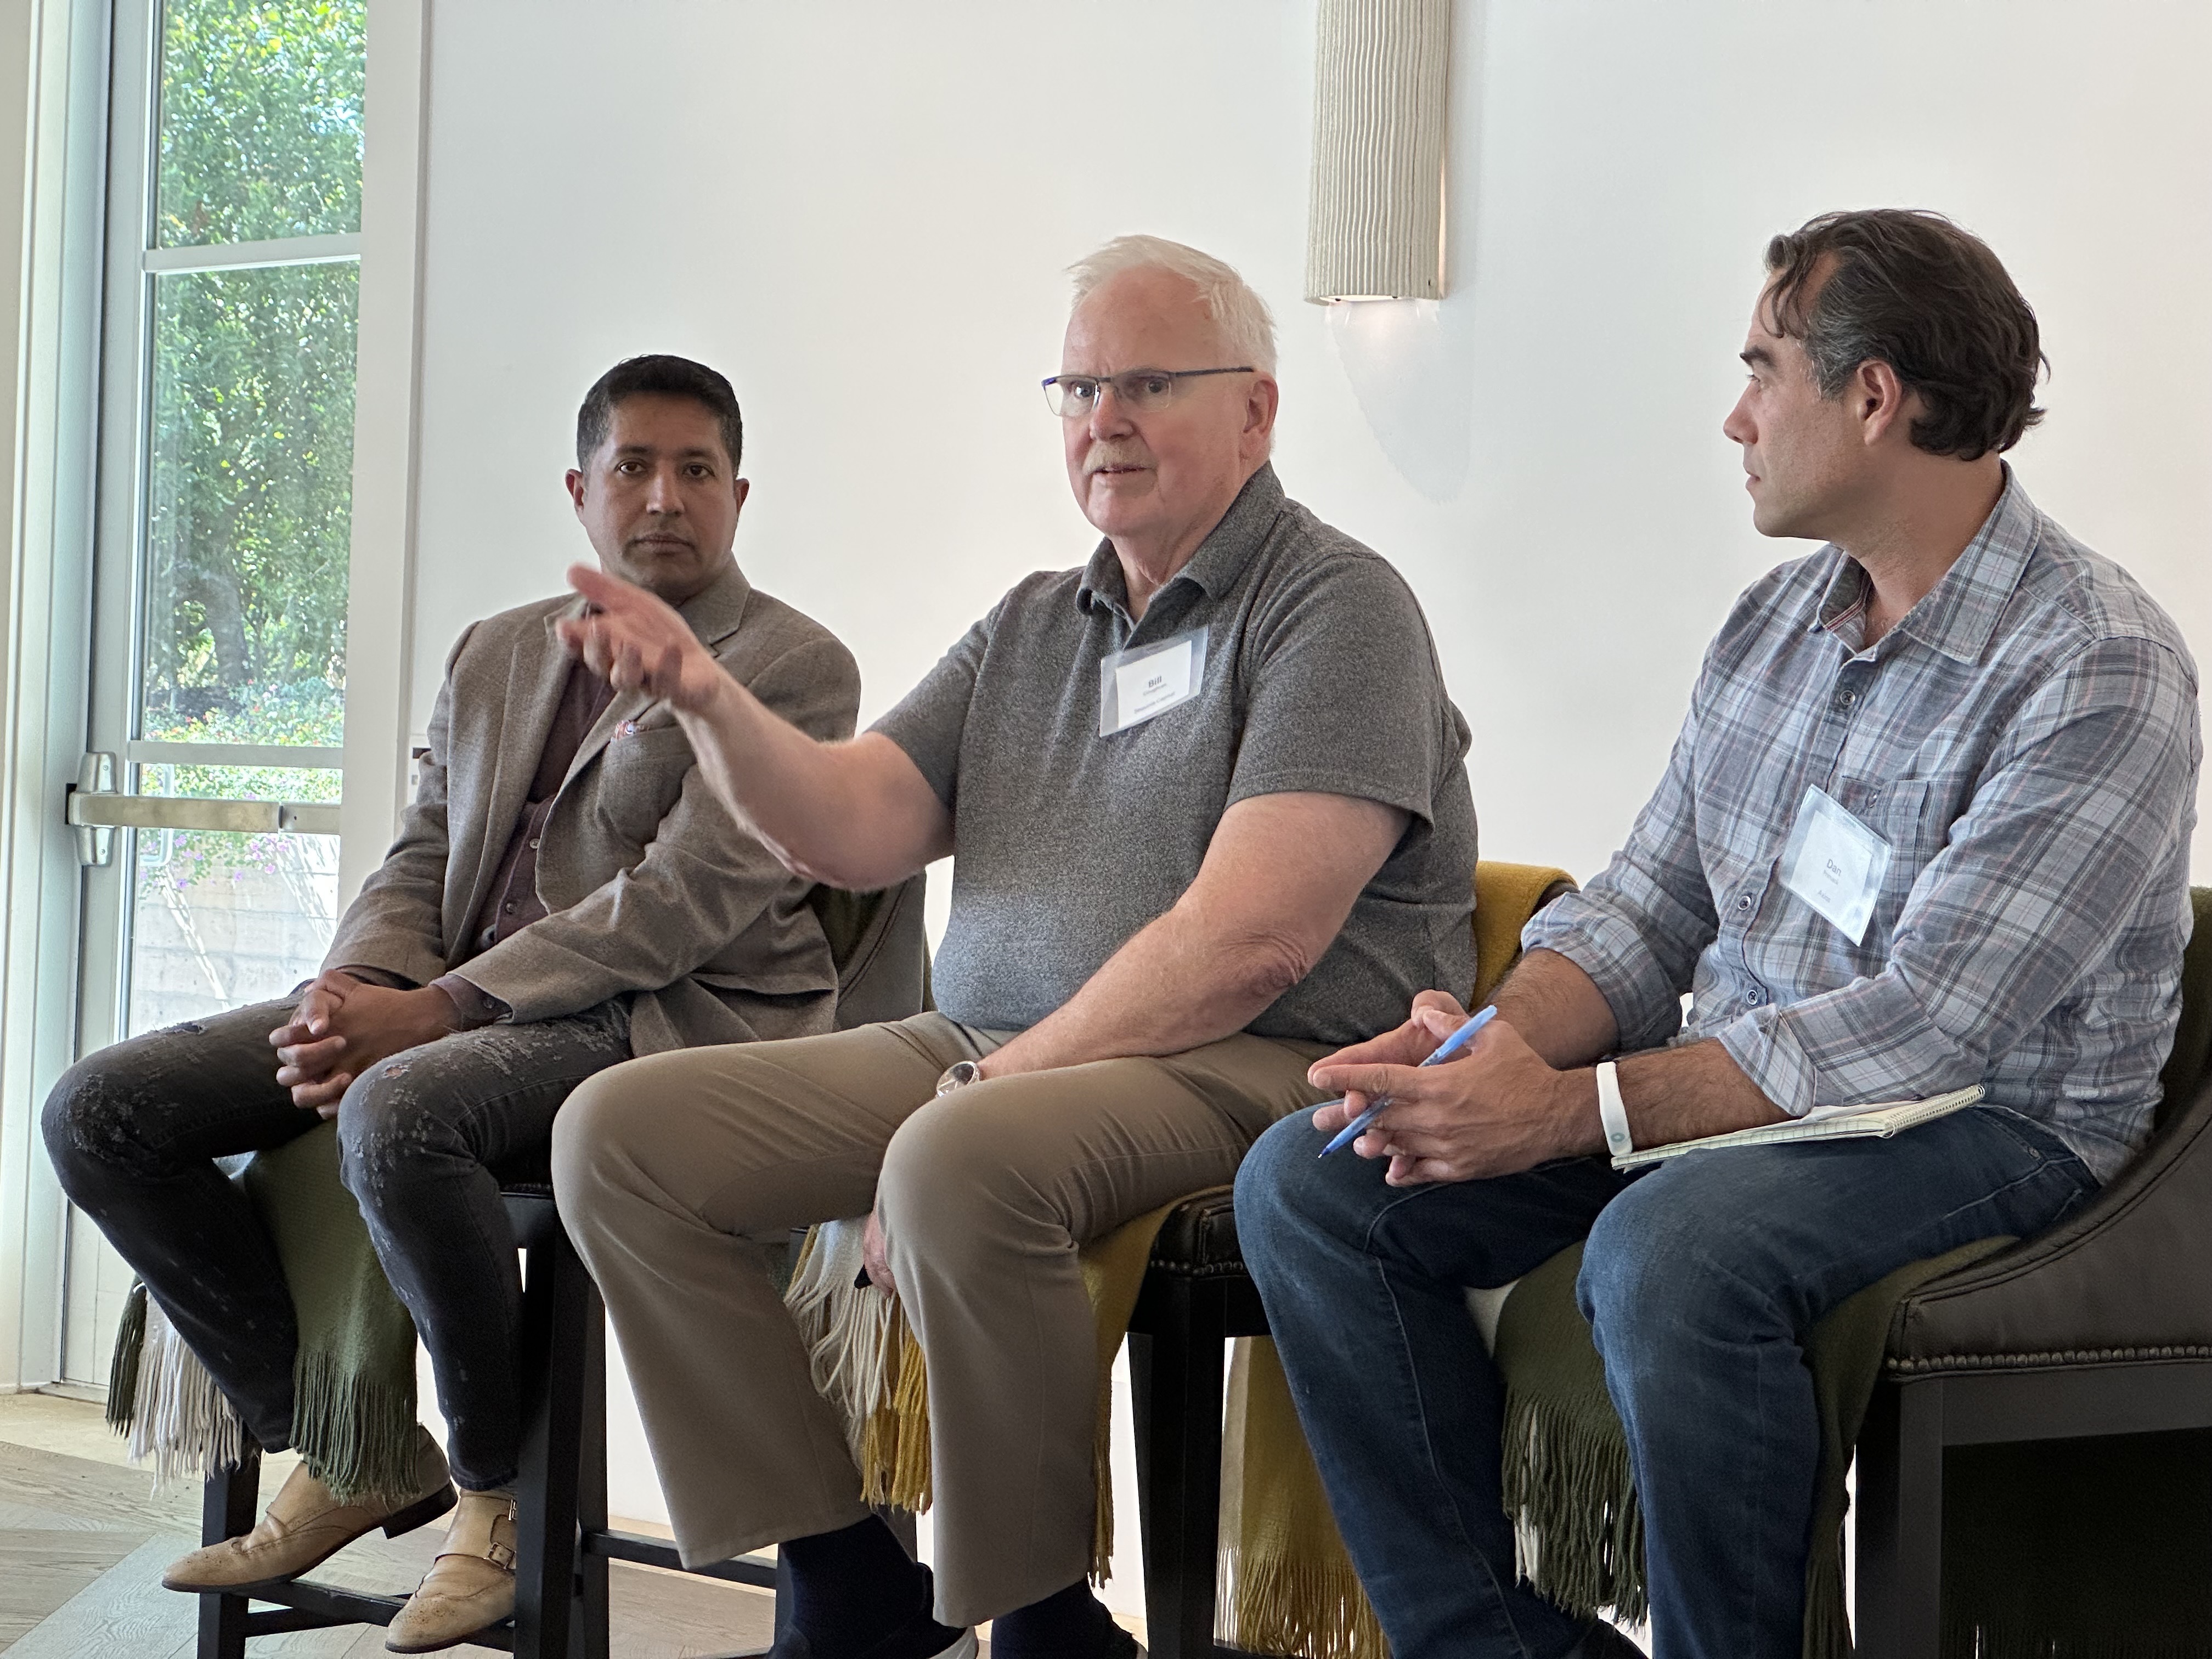 A tech panel moderated by Dan Primack of Axios with participation from Venky Ganesan, Partner with Menlo Ventures, and Bill Coughran, Partner with Sequoia Capital.